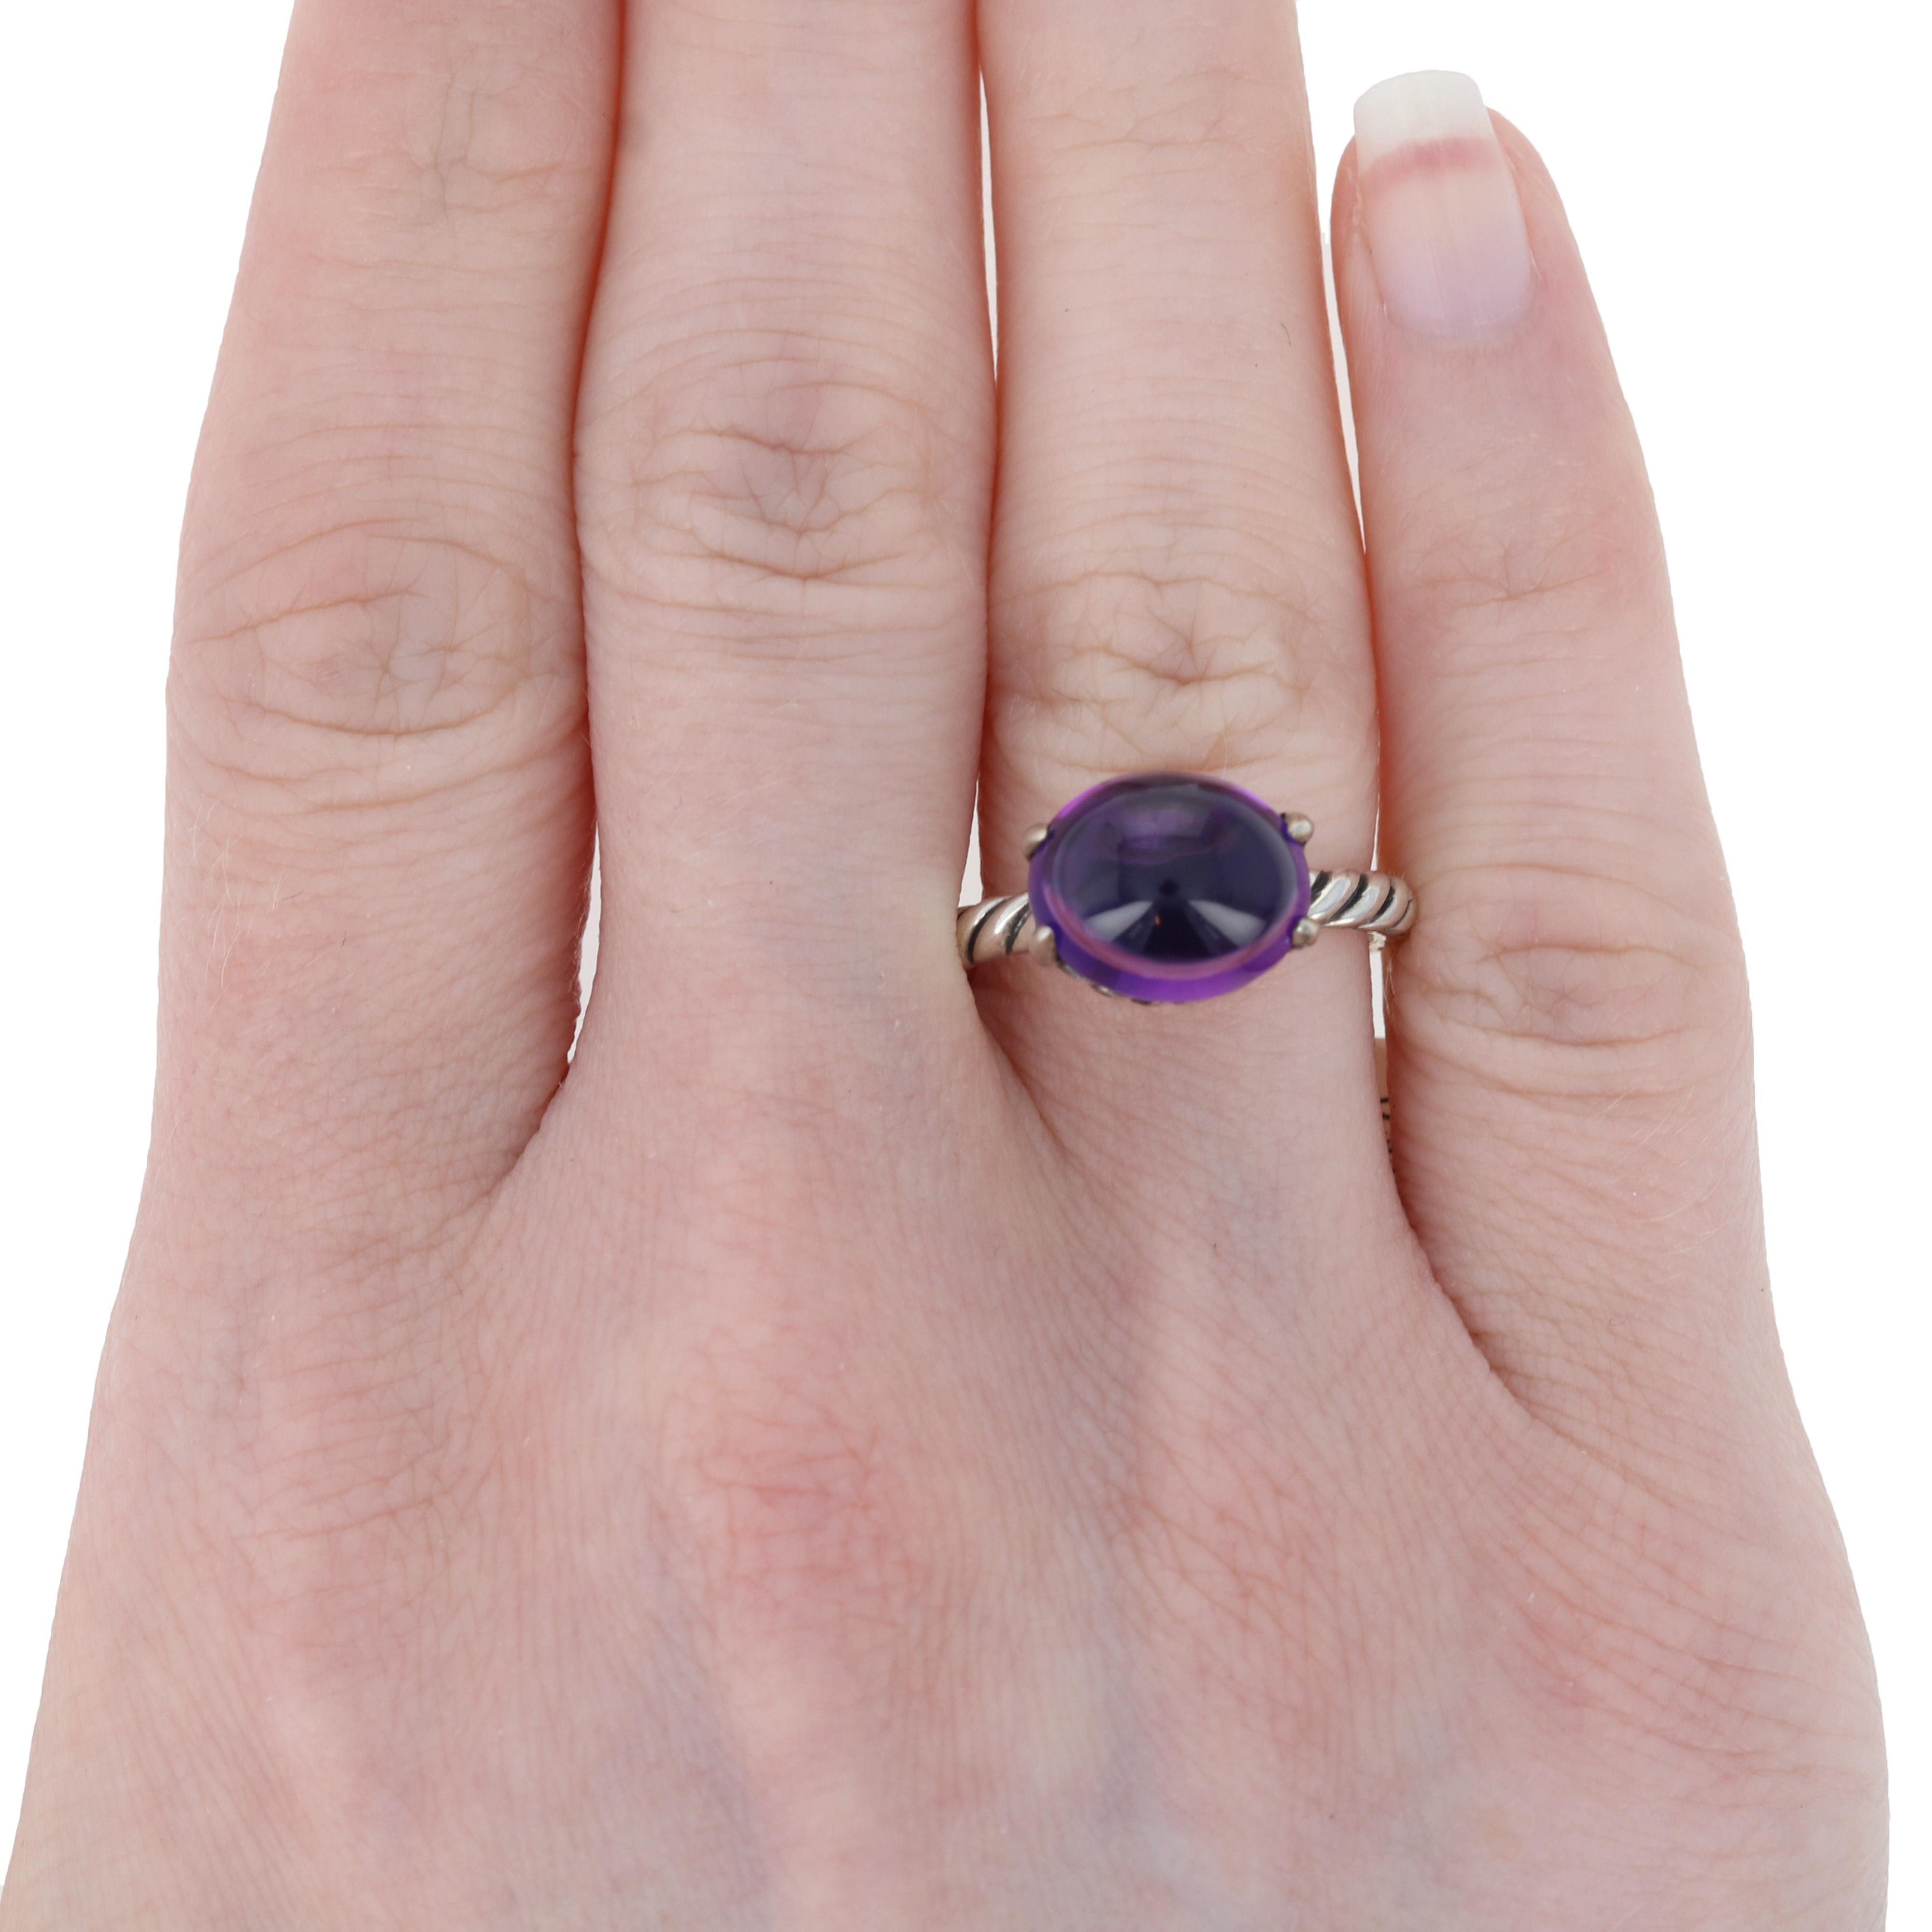 Give your favorite ensembles a touch of designer glamour when you pair them with these fabulous ring! Designed by David Yurman in sterling silver, this Color Classics ring features an amethyst cabochon. The royal-purple amethyst measures a